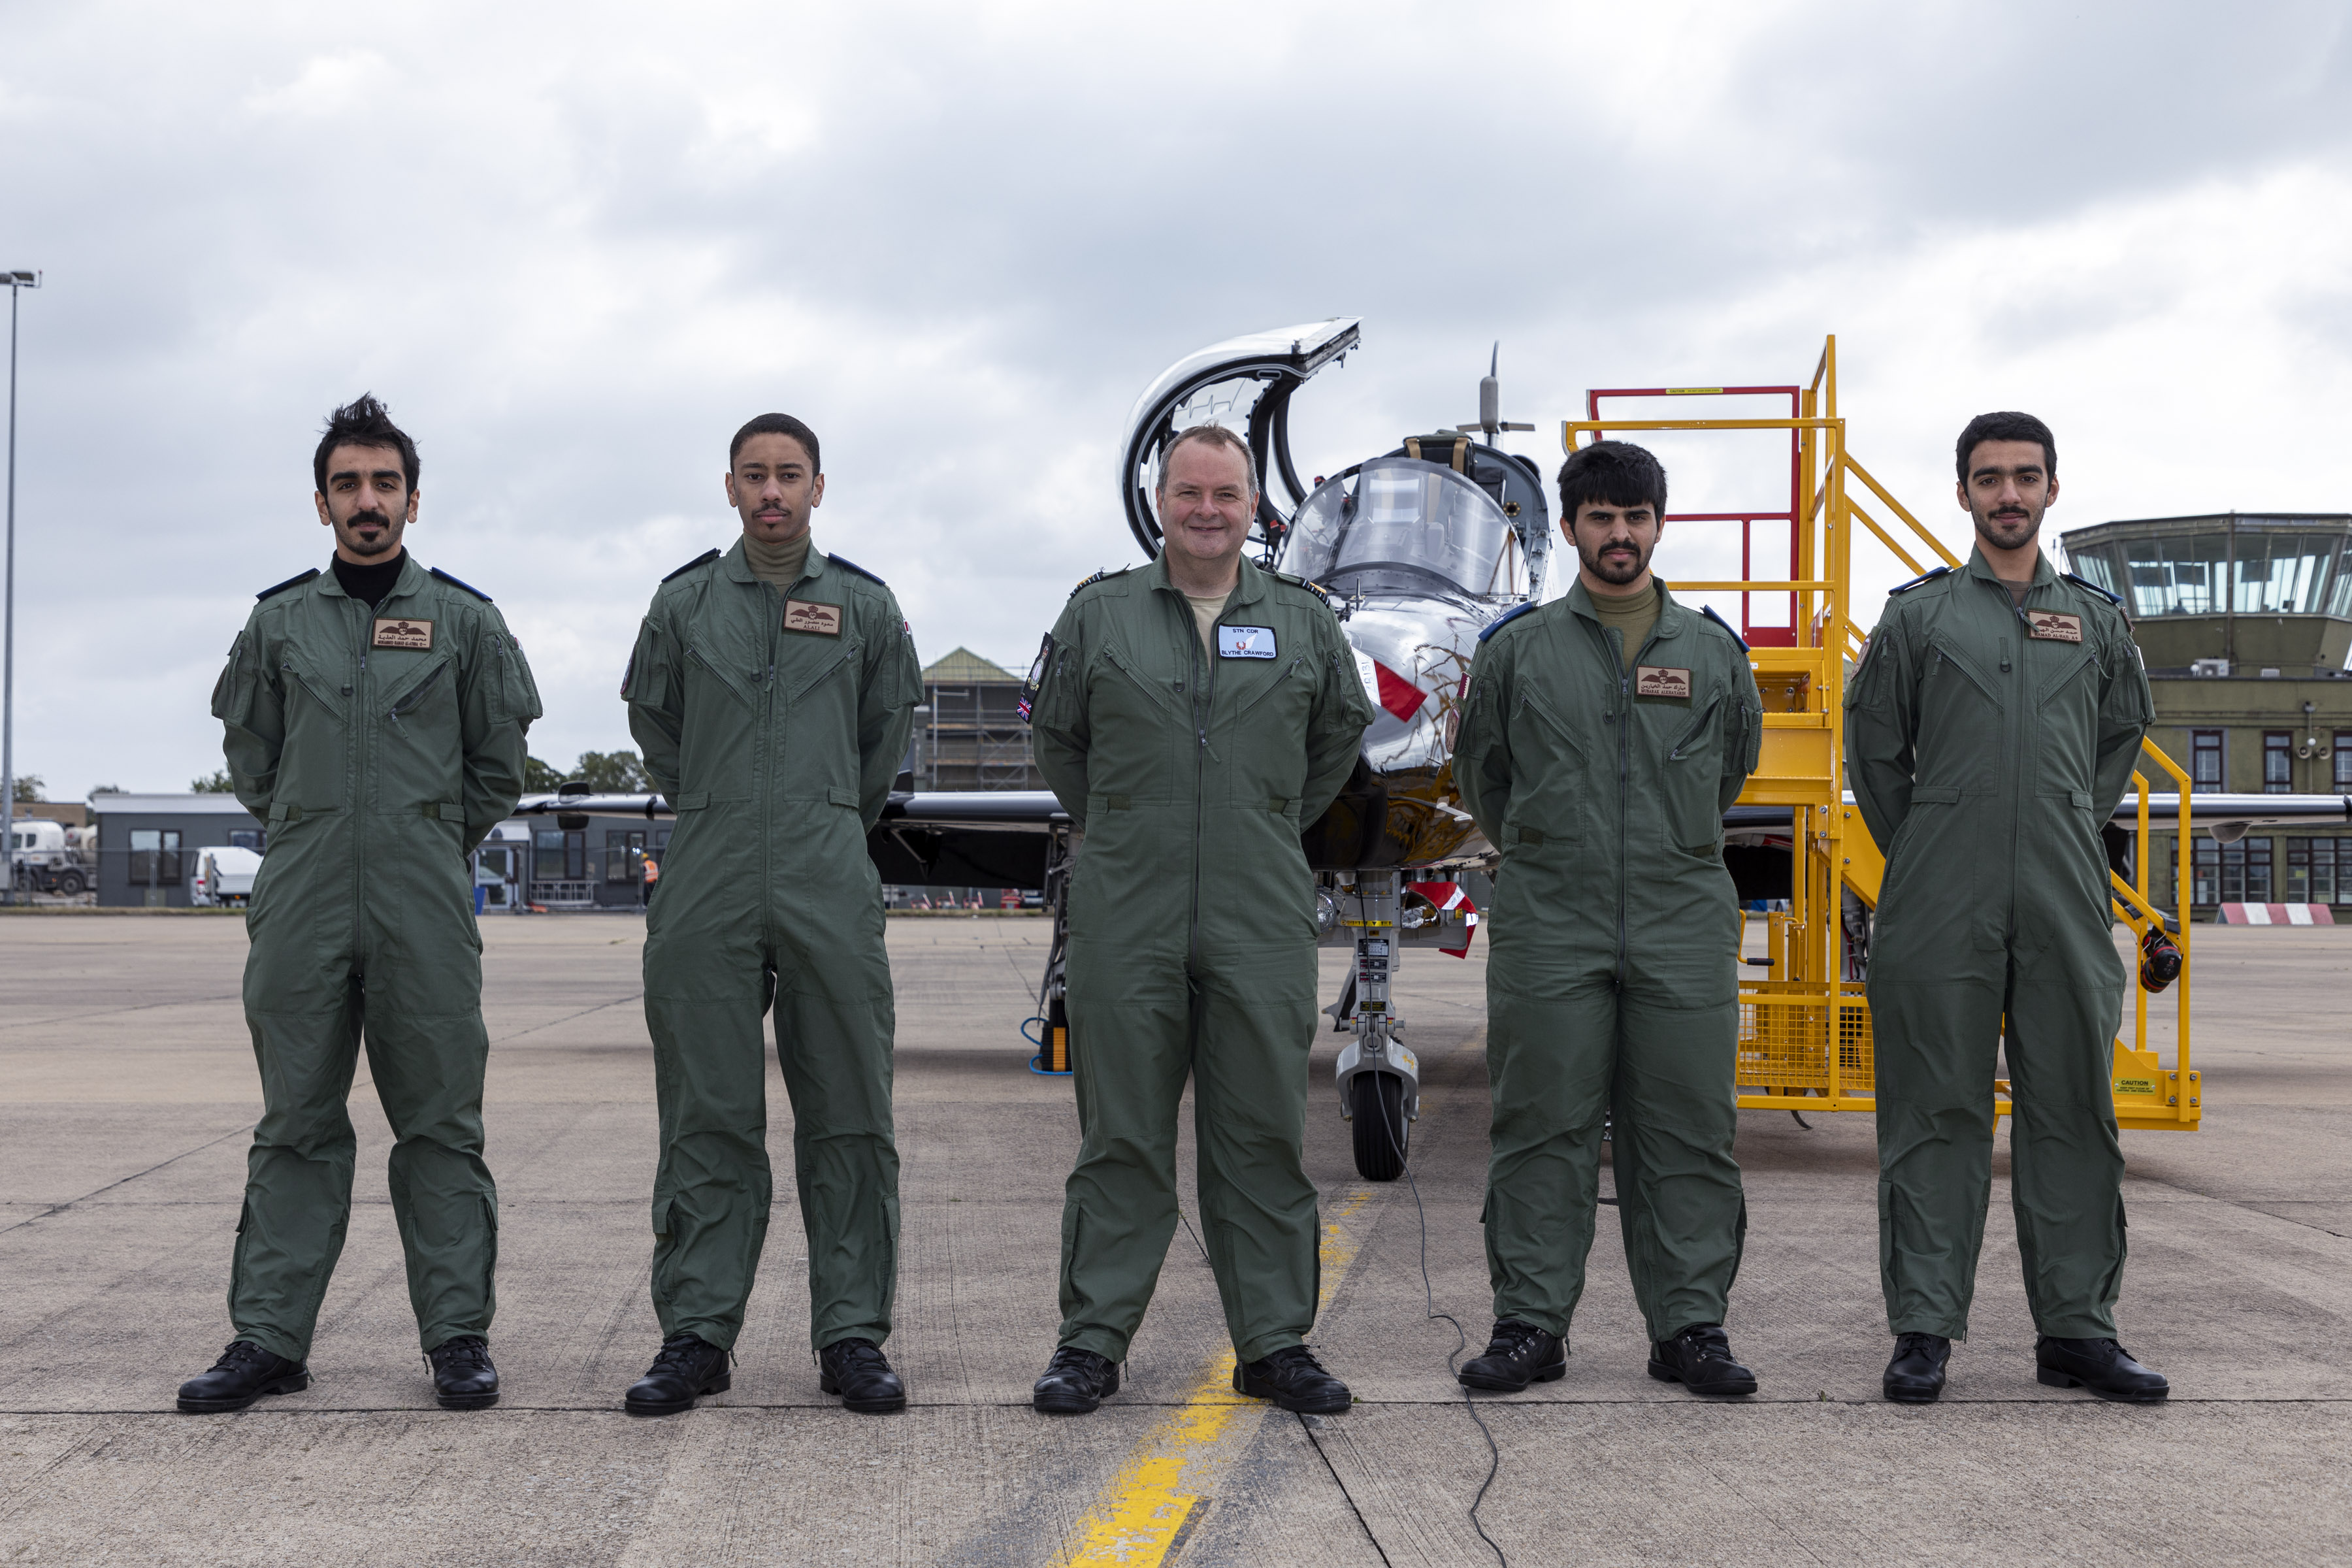 Personnel stand before a new Qatari Hawk aircraft and ramp.